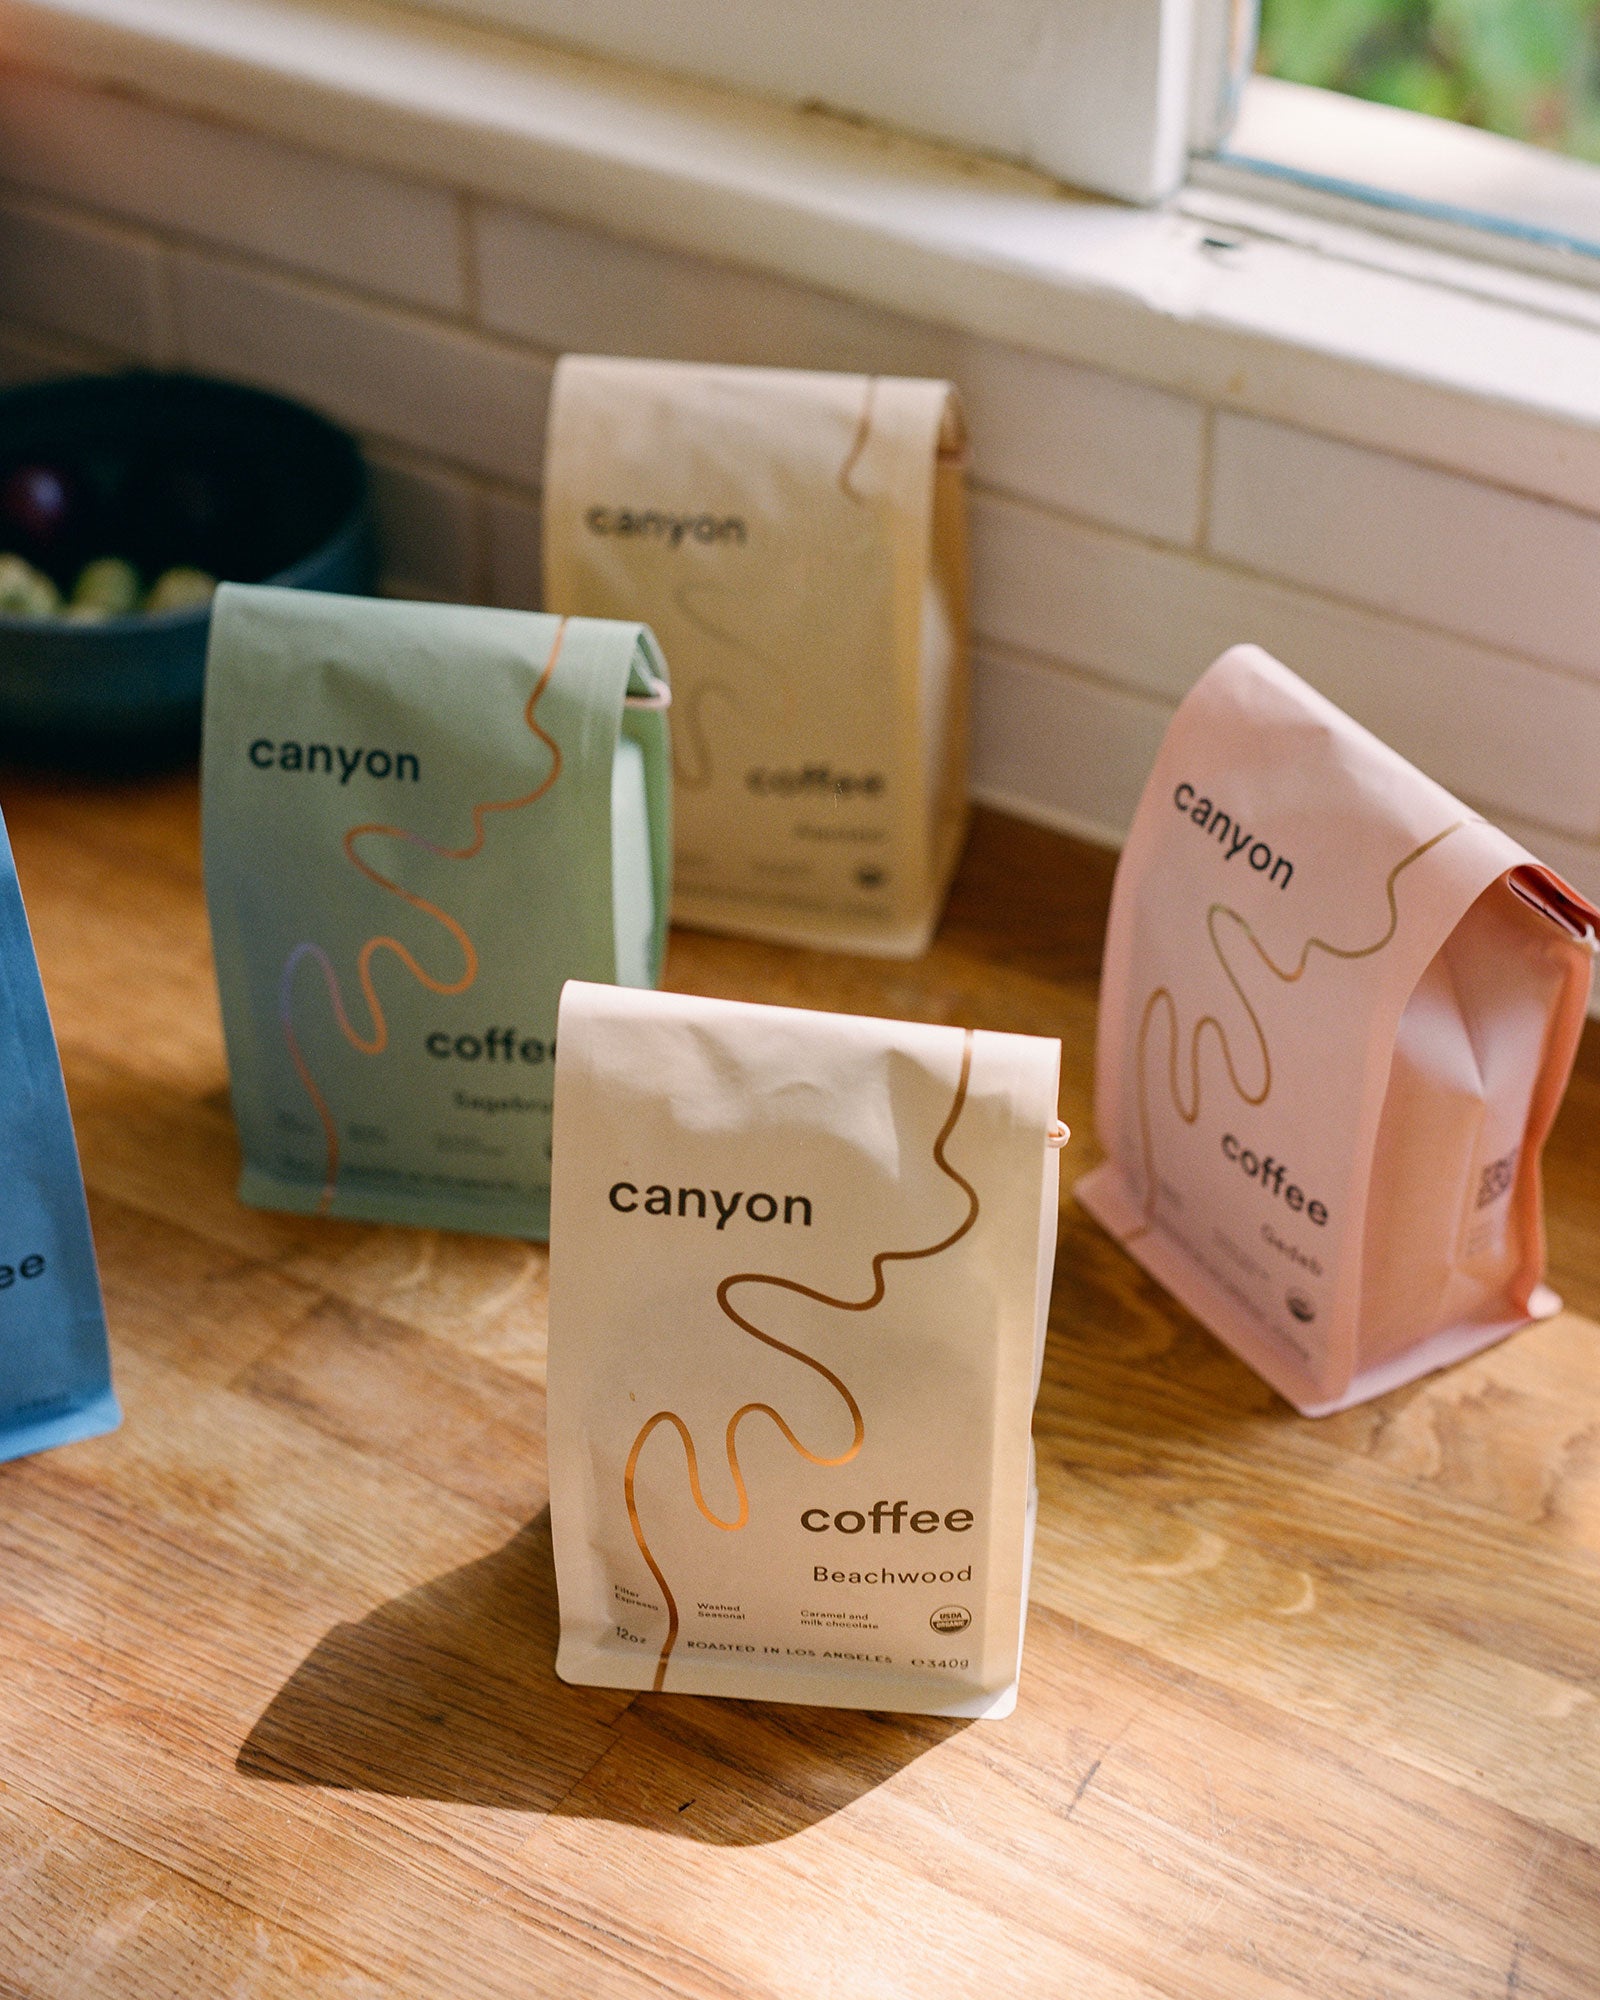 Bags of Canyon Coffee on a wood counter in Los Angeles